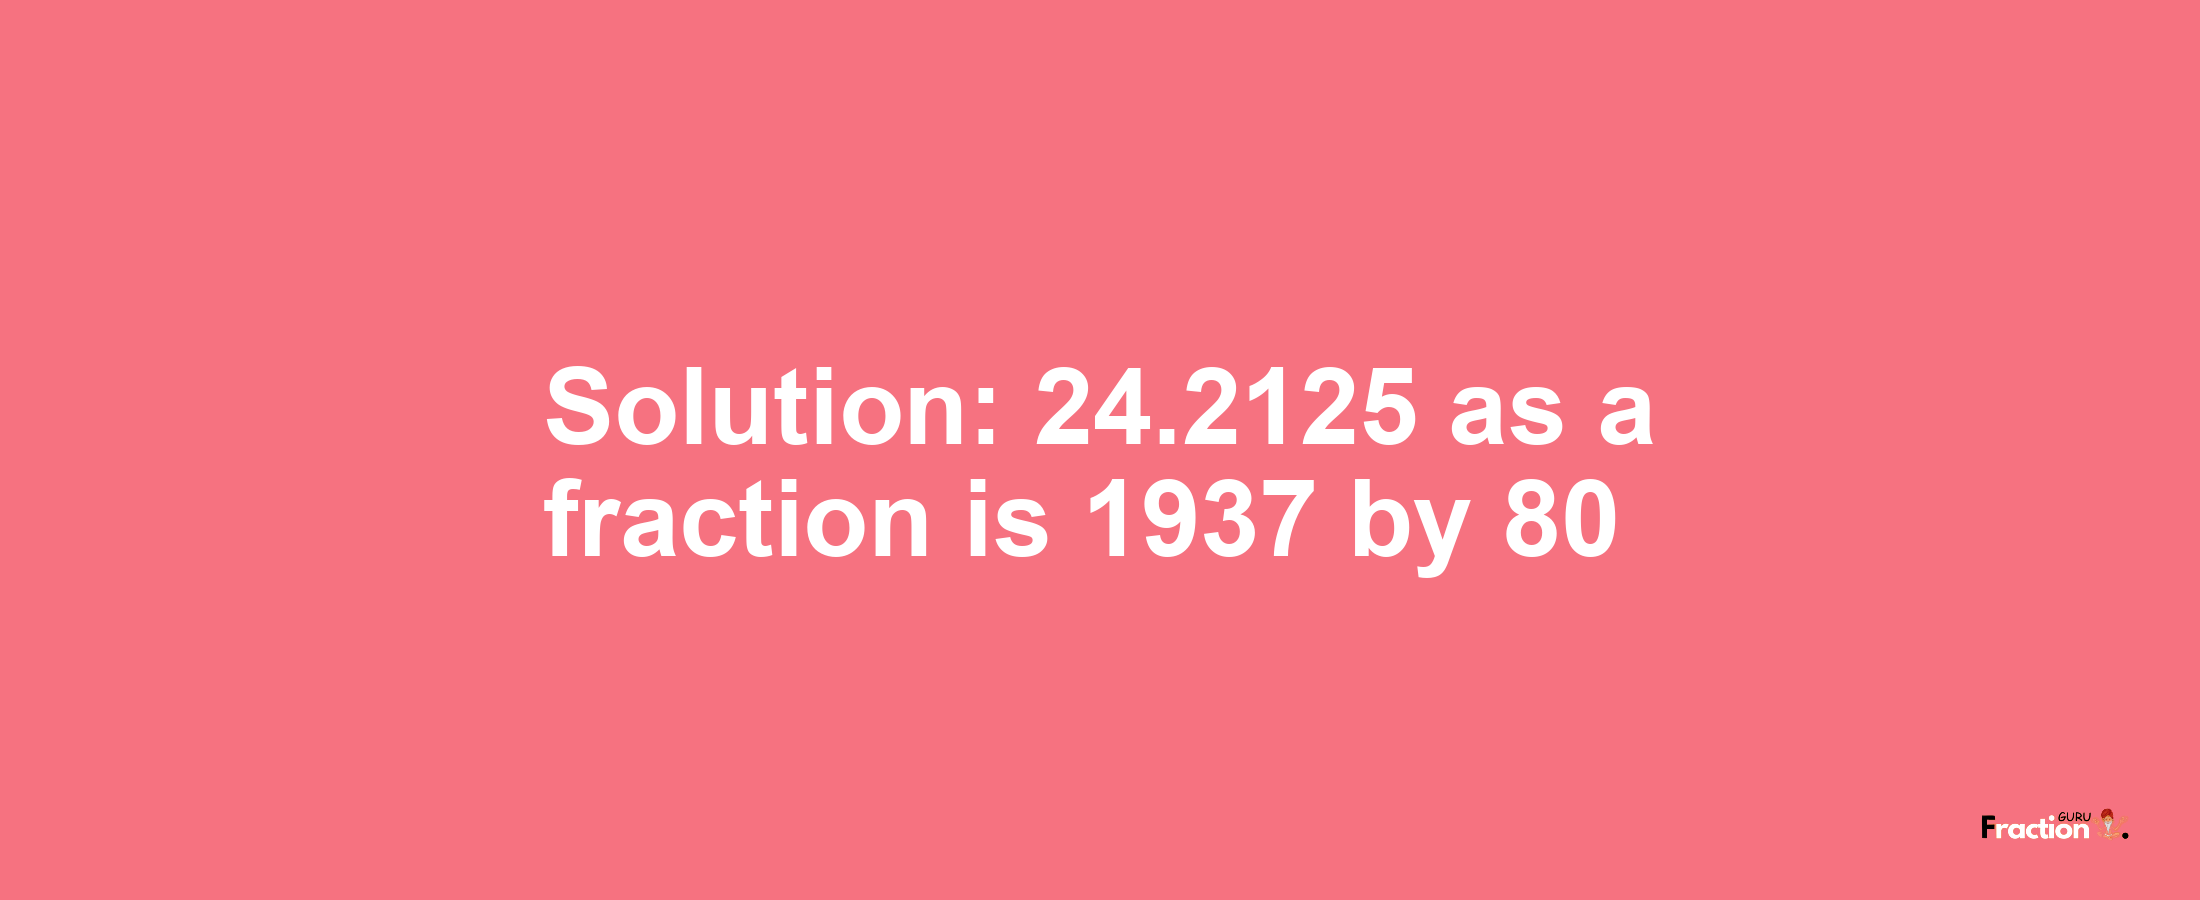 Solution:24.2125 as a fraction is 1937/80